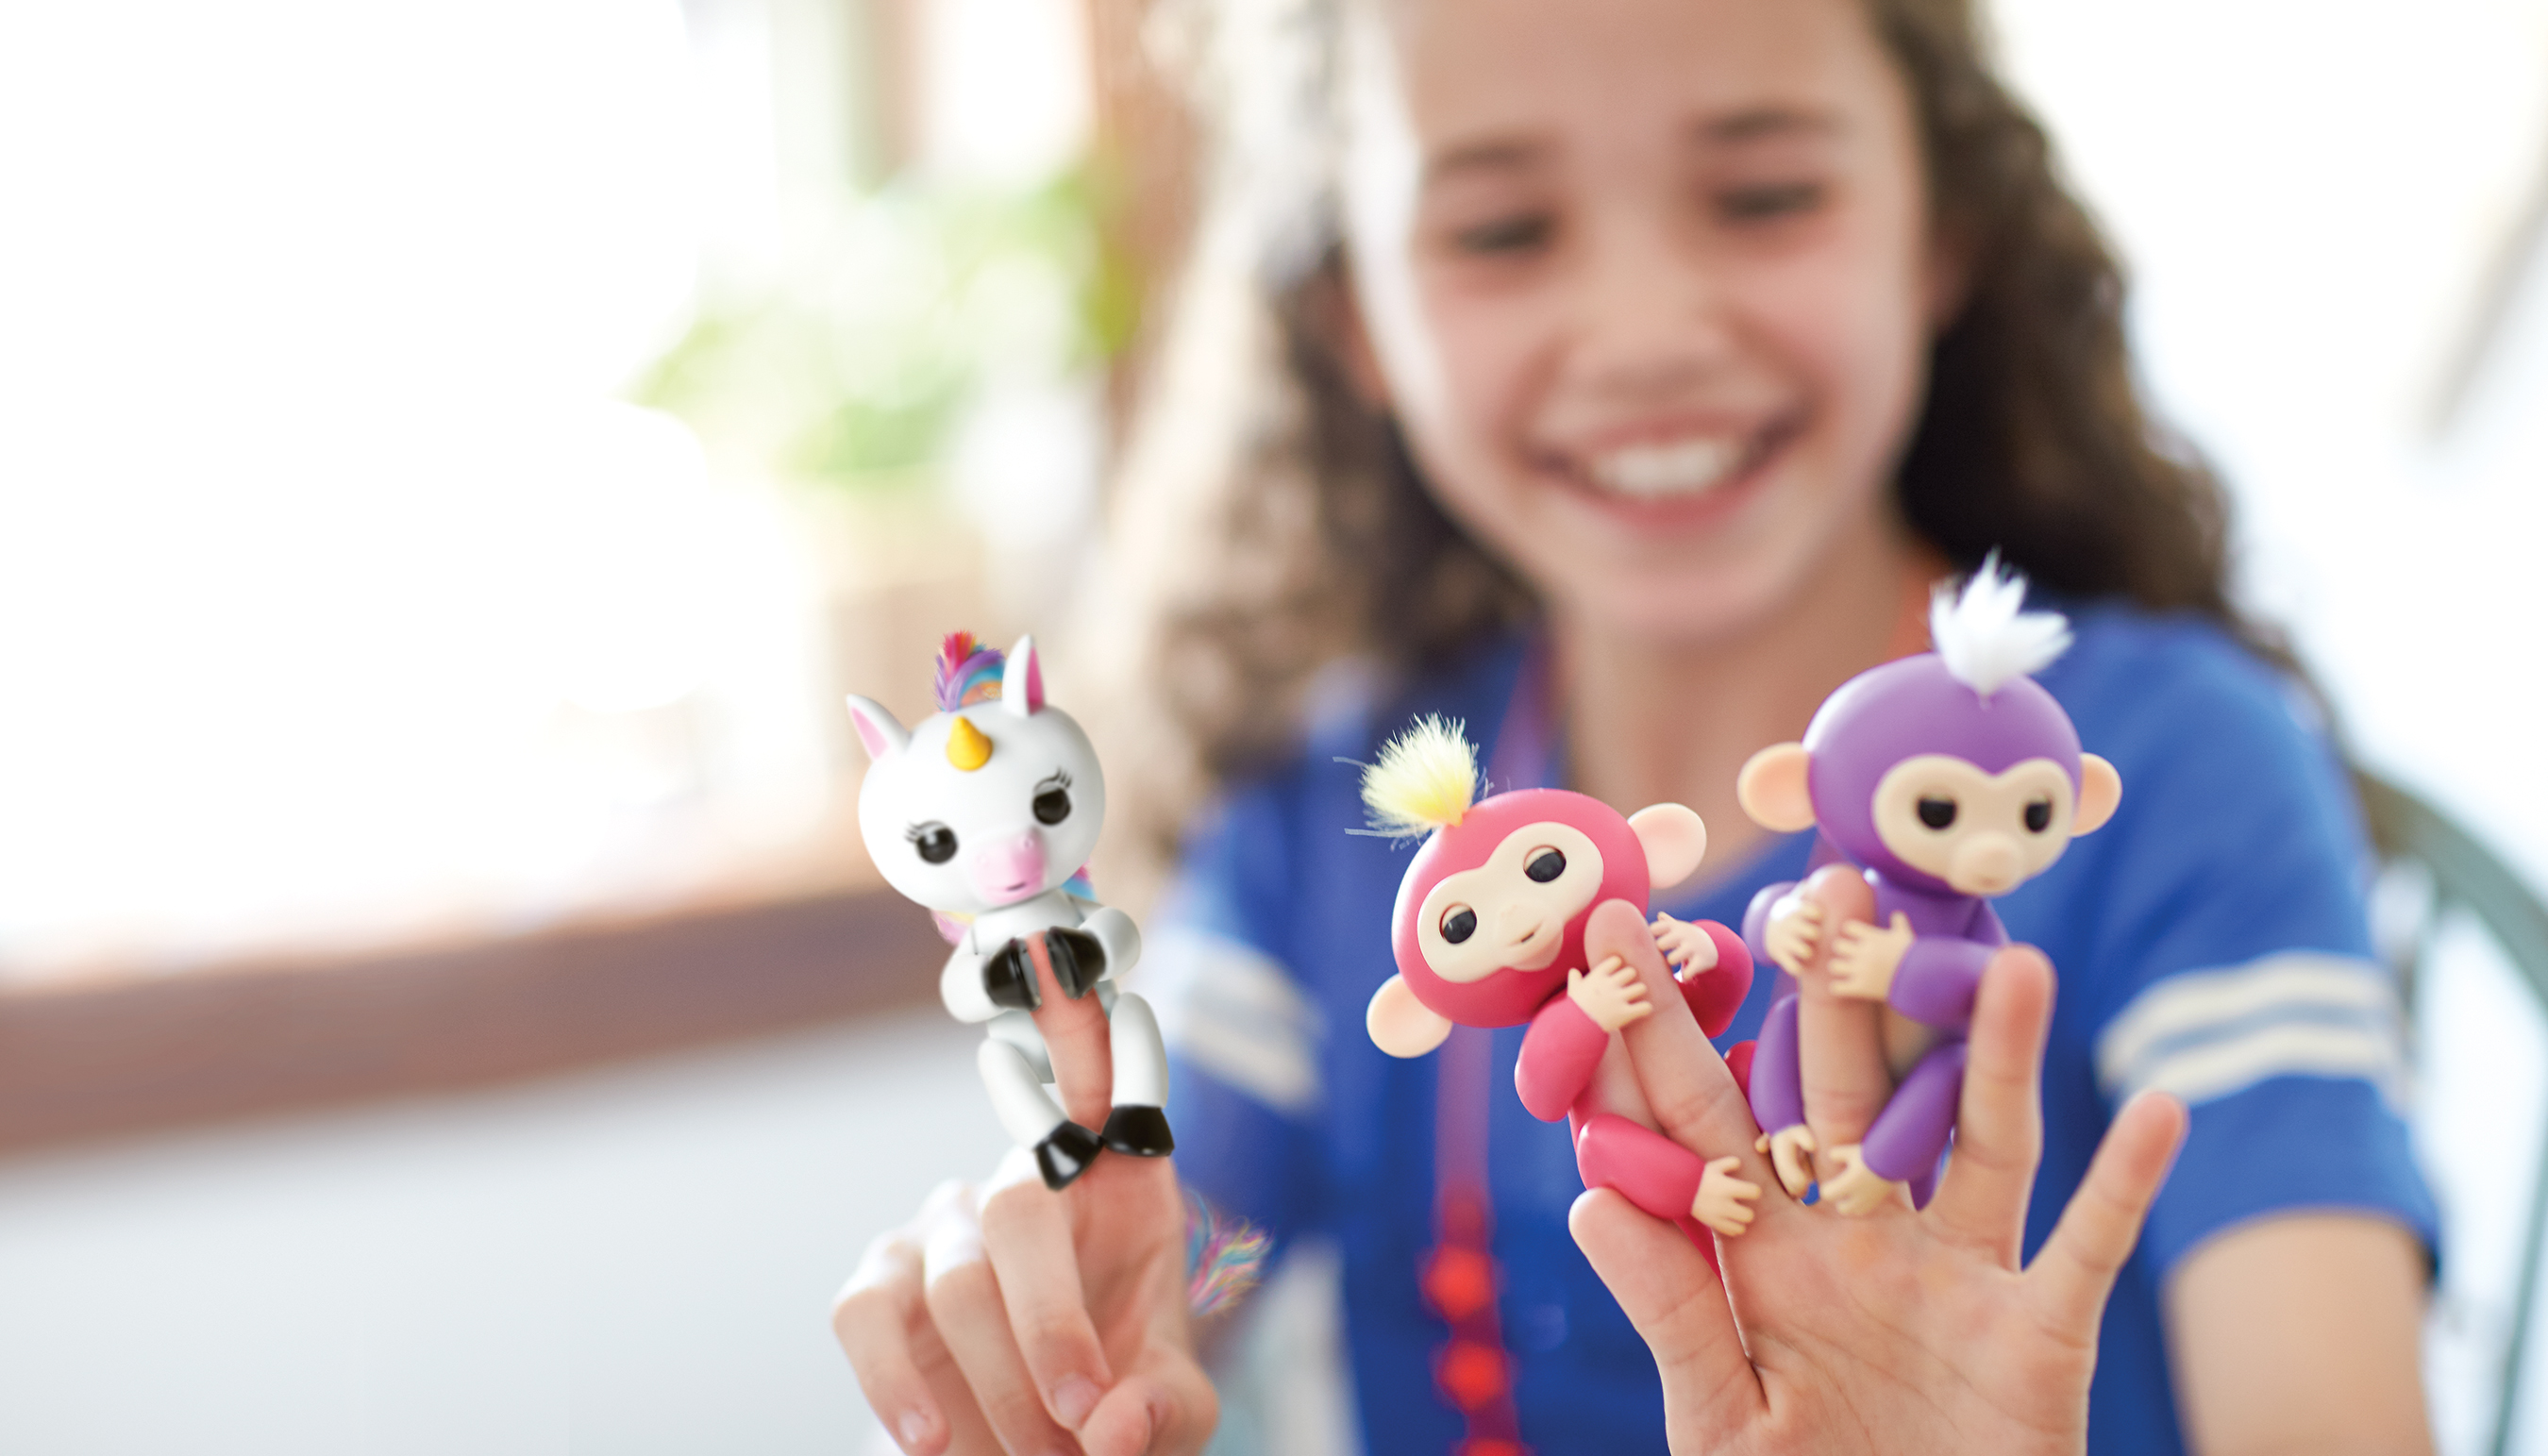 Where to Find Fingerlings Toys — the Hottest Holiday 2017